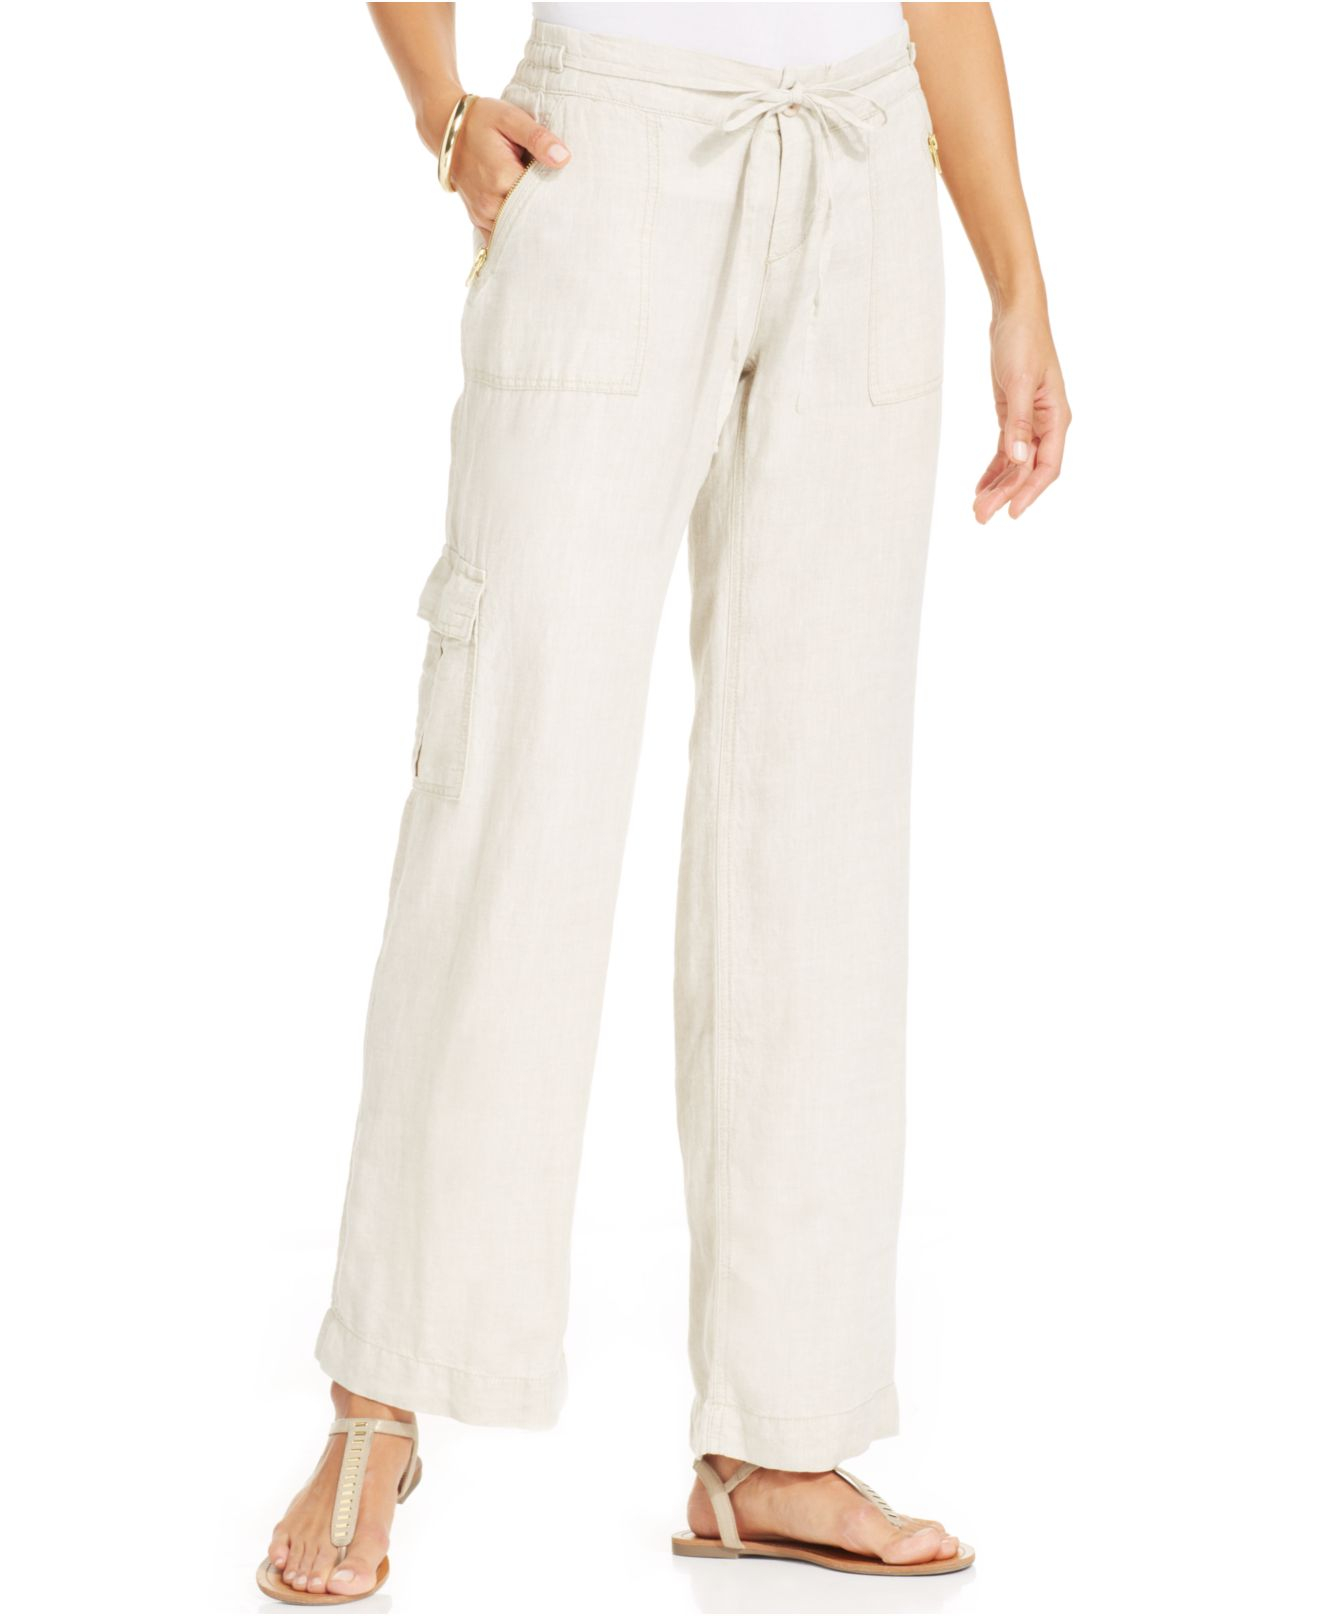 Lyst - Kut From The Kloth Wide-Leg Linen Pants in Natural